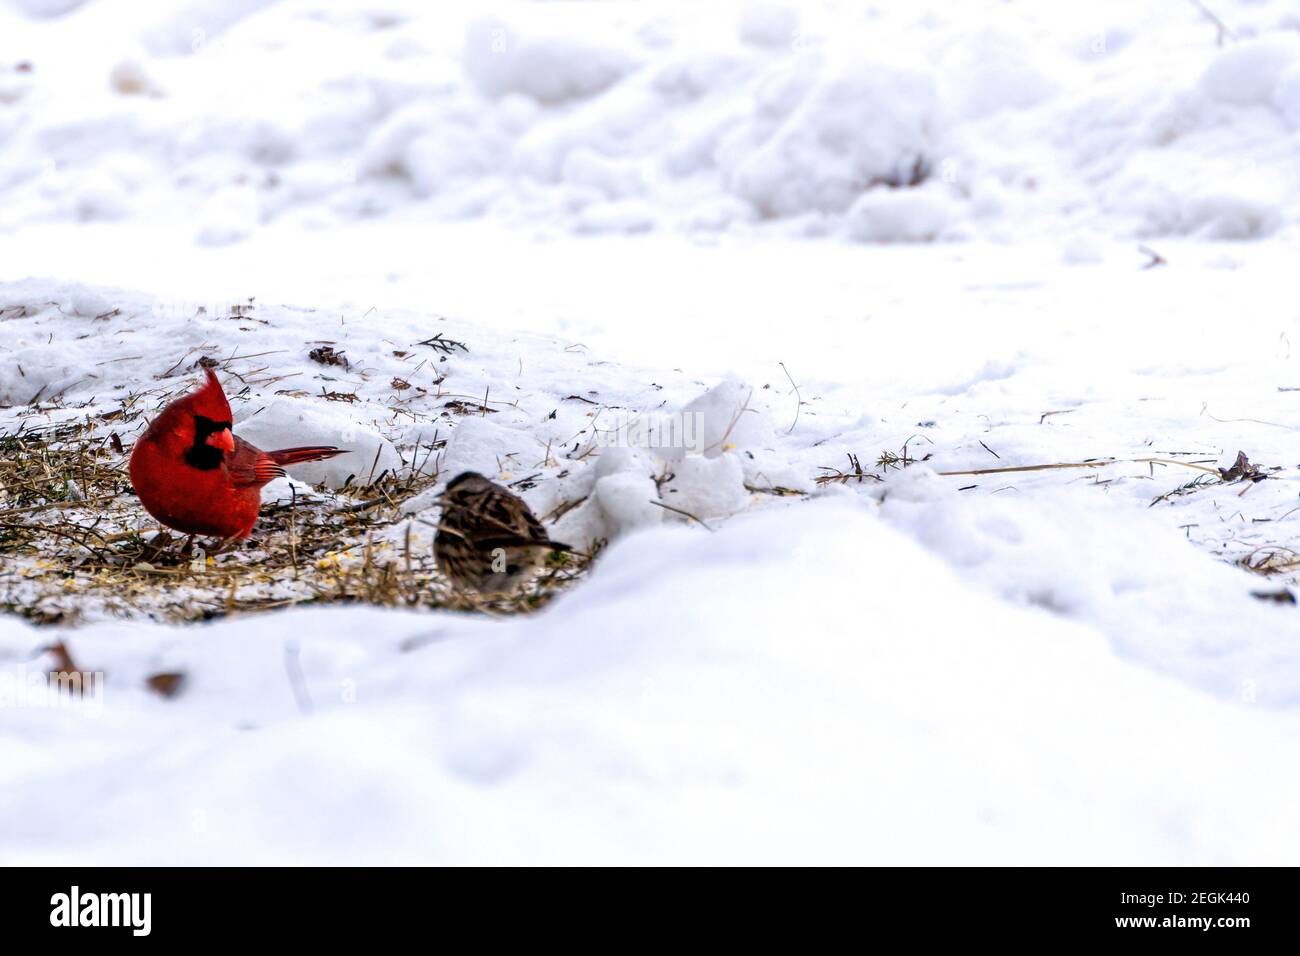 Cardinals looking for food after a fresh snowfall Stock Photo